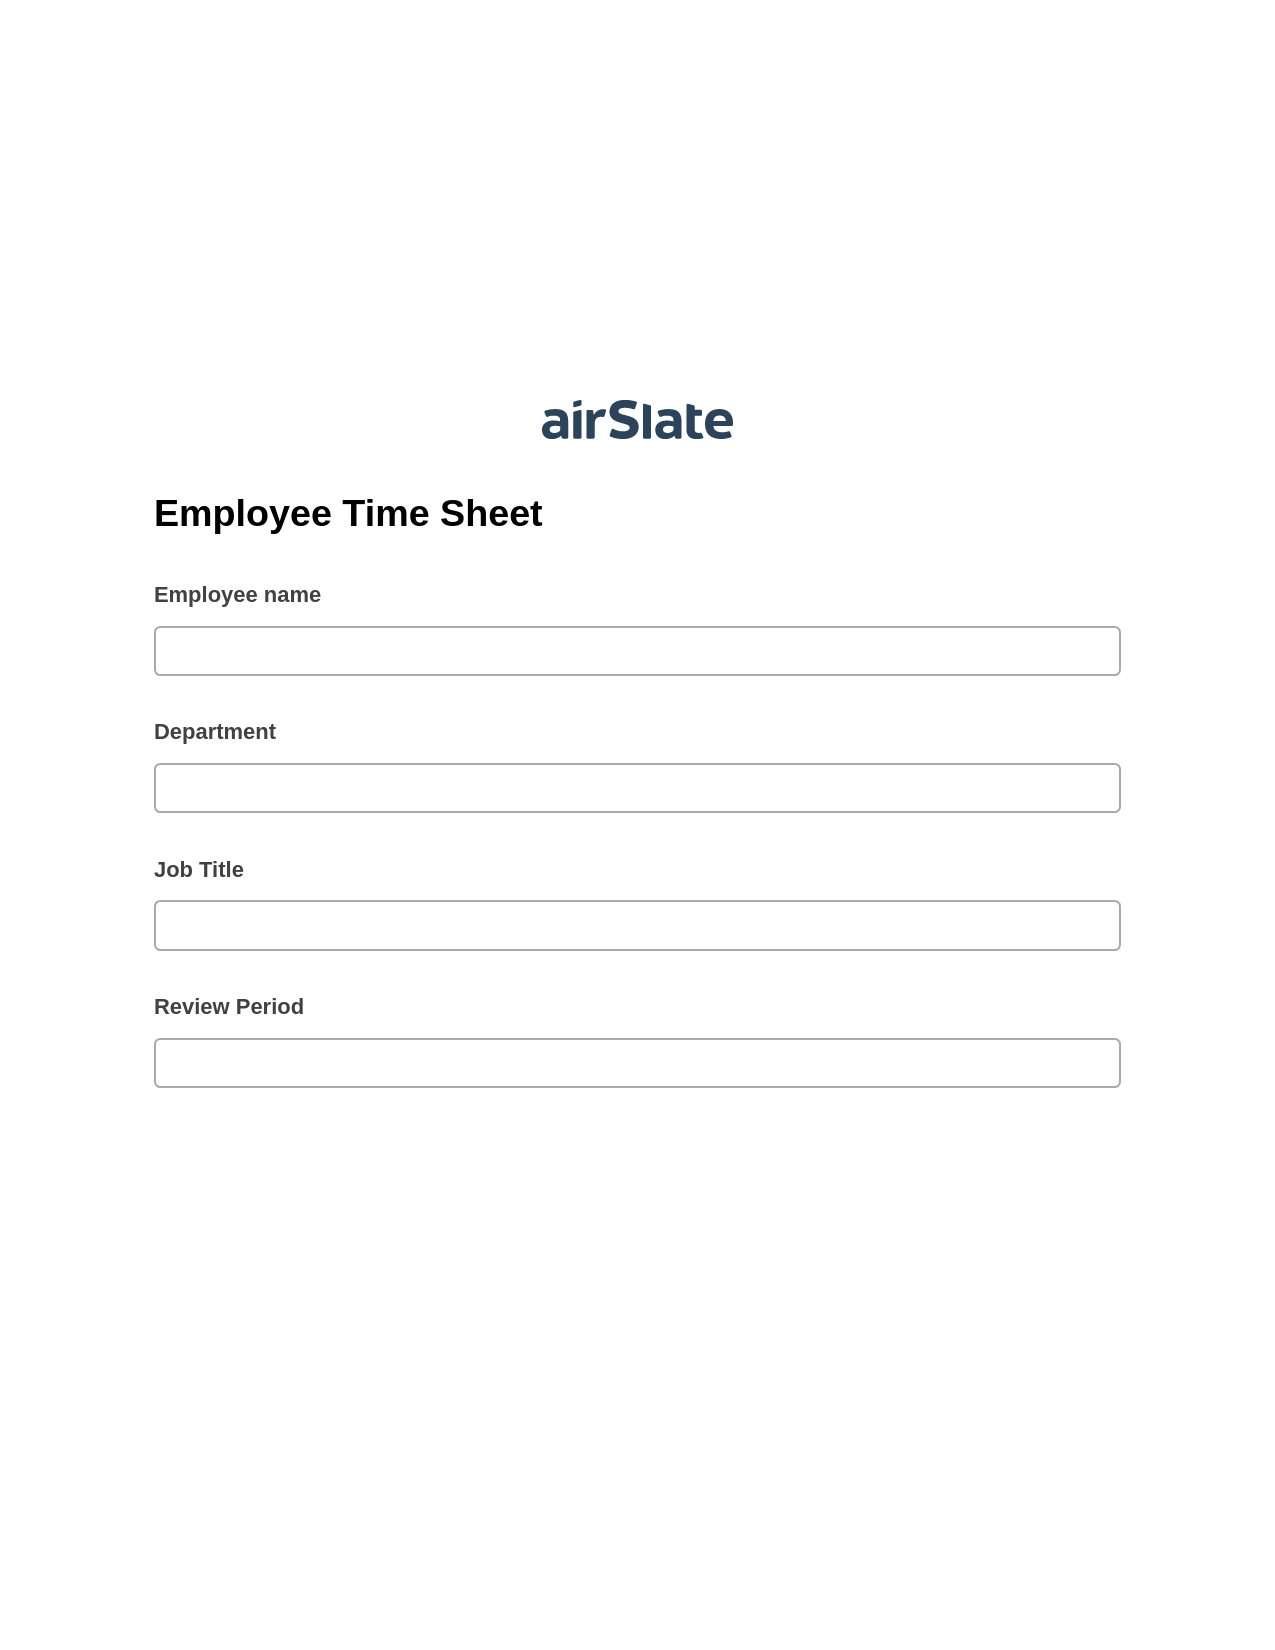 Employee Time Sheet Pre-fill from Office 365 Excel Bot, Send Mailchimp Campaign Bot, Export to Excel 365 Bot